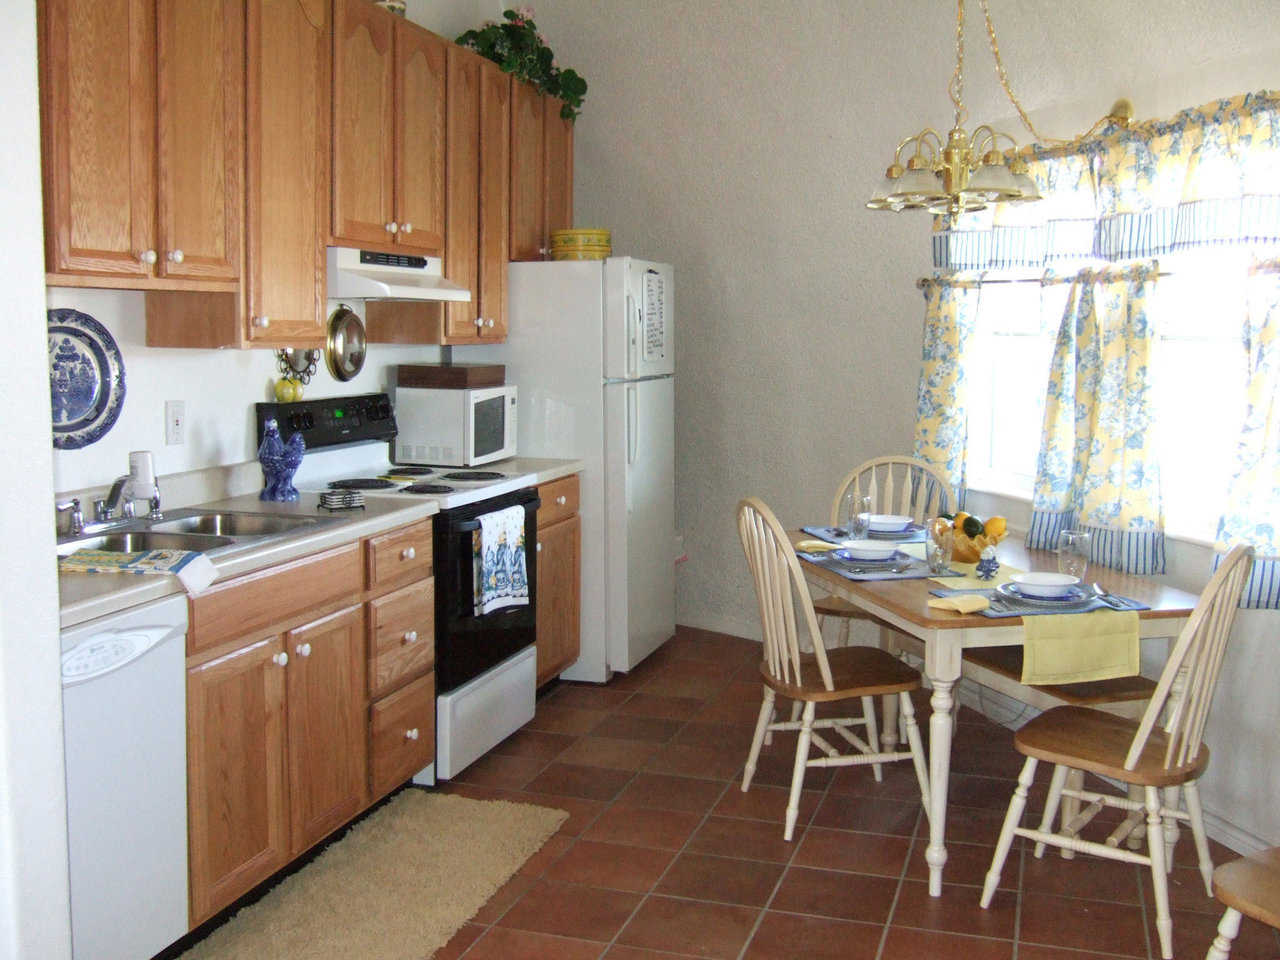 No wasted space — Here is a pleasant kitchen for both cooking and informal dining.